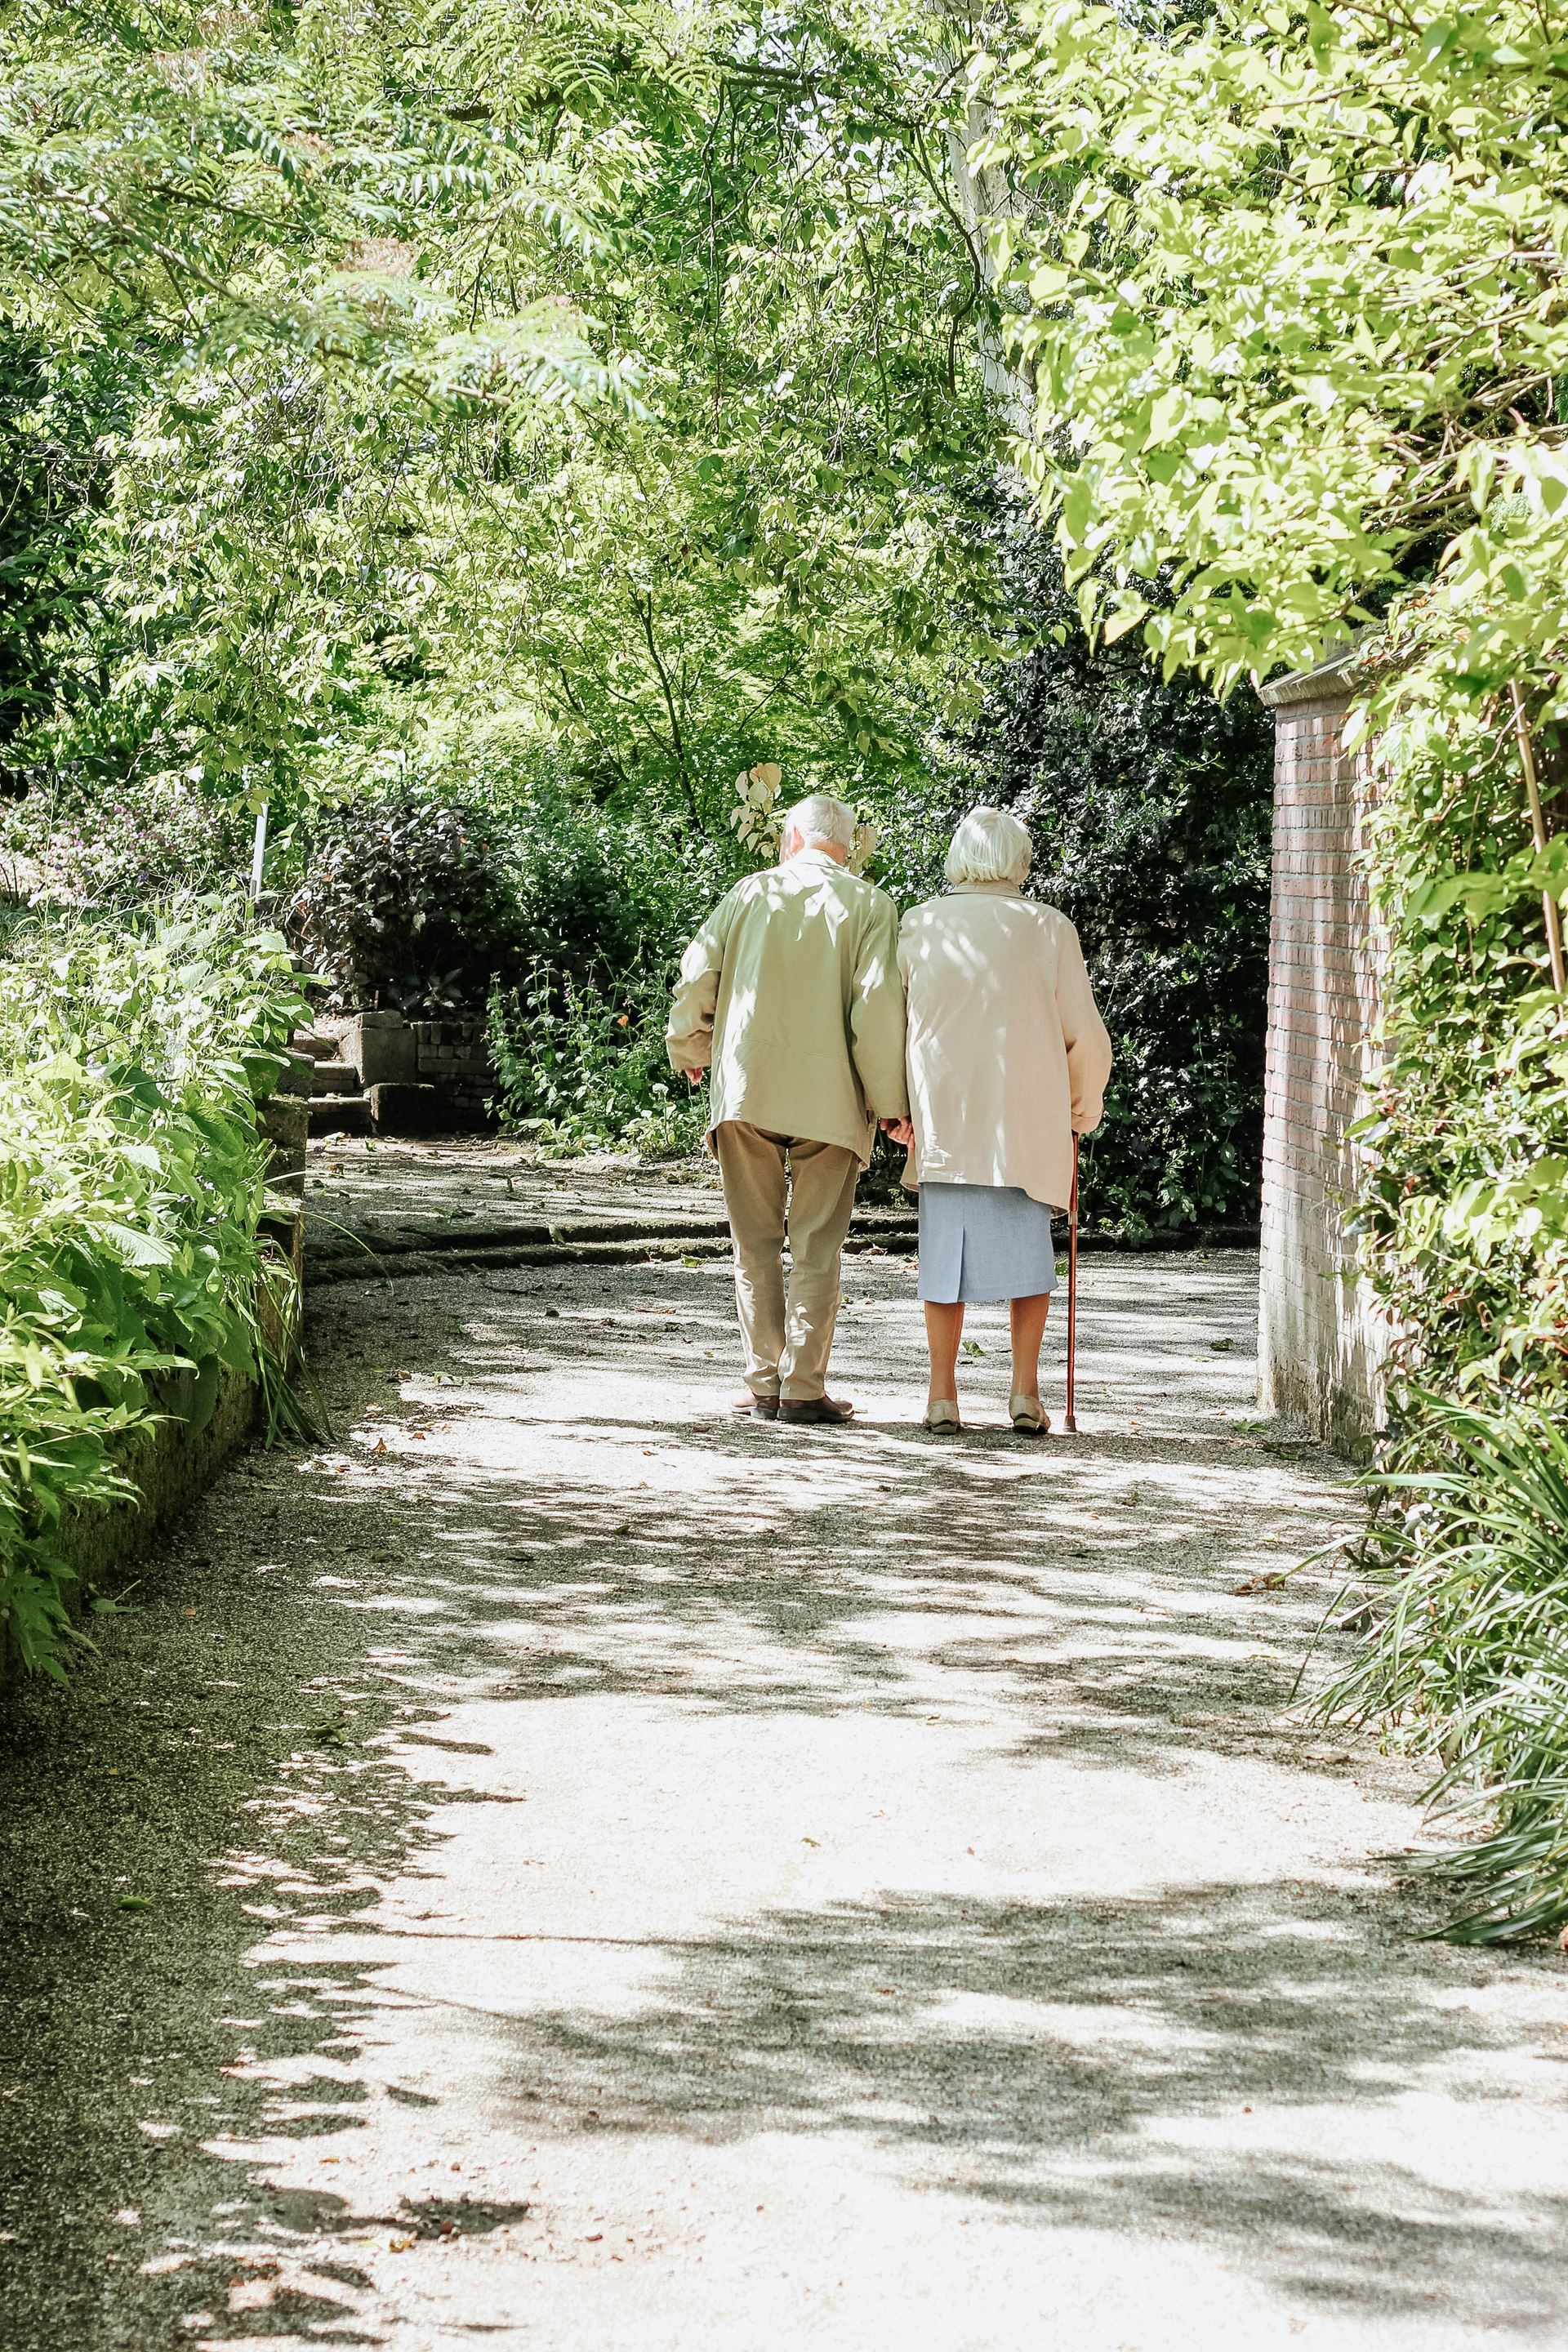 An older couple walking together in a park